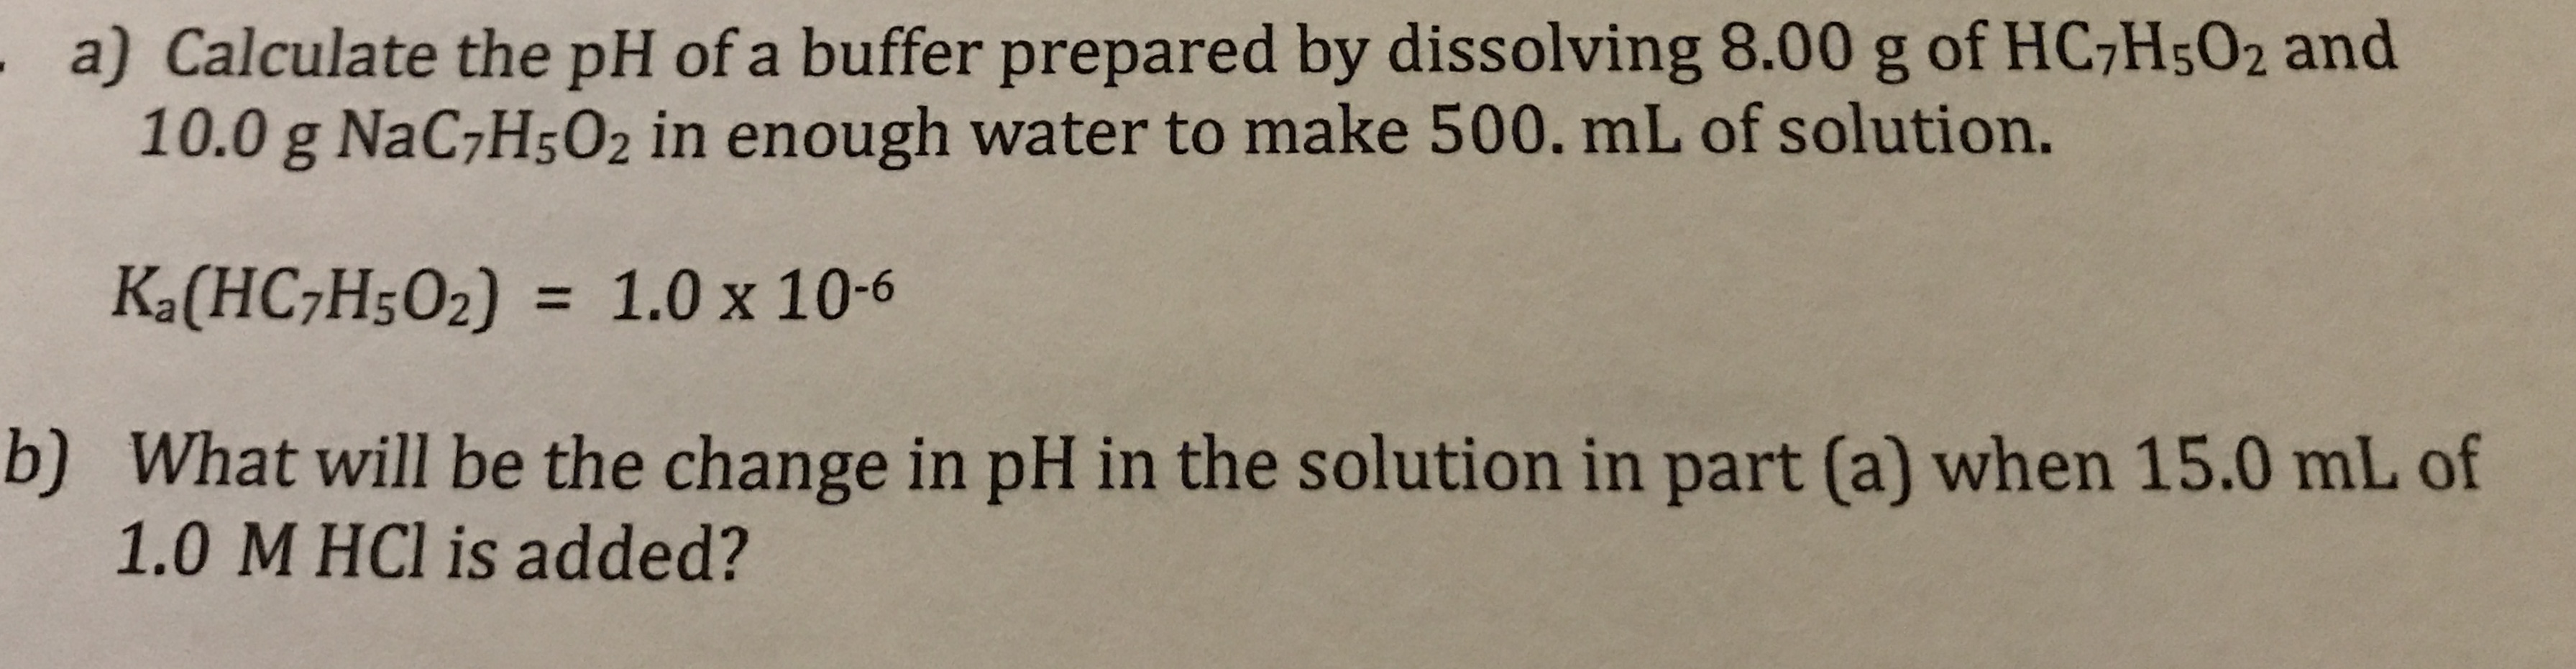 a) Calculate the pH of a buffer prepared by dissolving 8.00 g of HC7H5O2 and
10.0 g NaC7H5O2 in enough water to make 500. mL of solution.
Ka(HC;H5O2) = 1.0 x 10-6
%3D
b) What will be the change in pH in the solution in part (a) when 15.0 mL of
1.0 M HCl is added?
